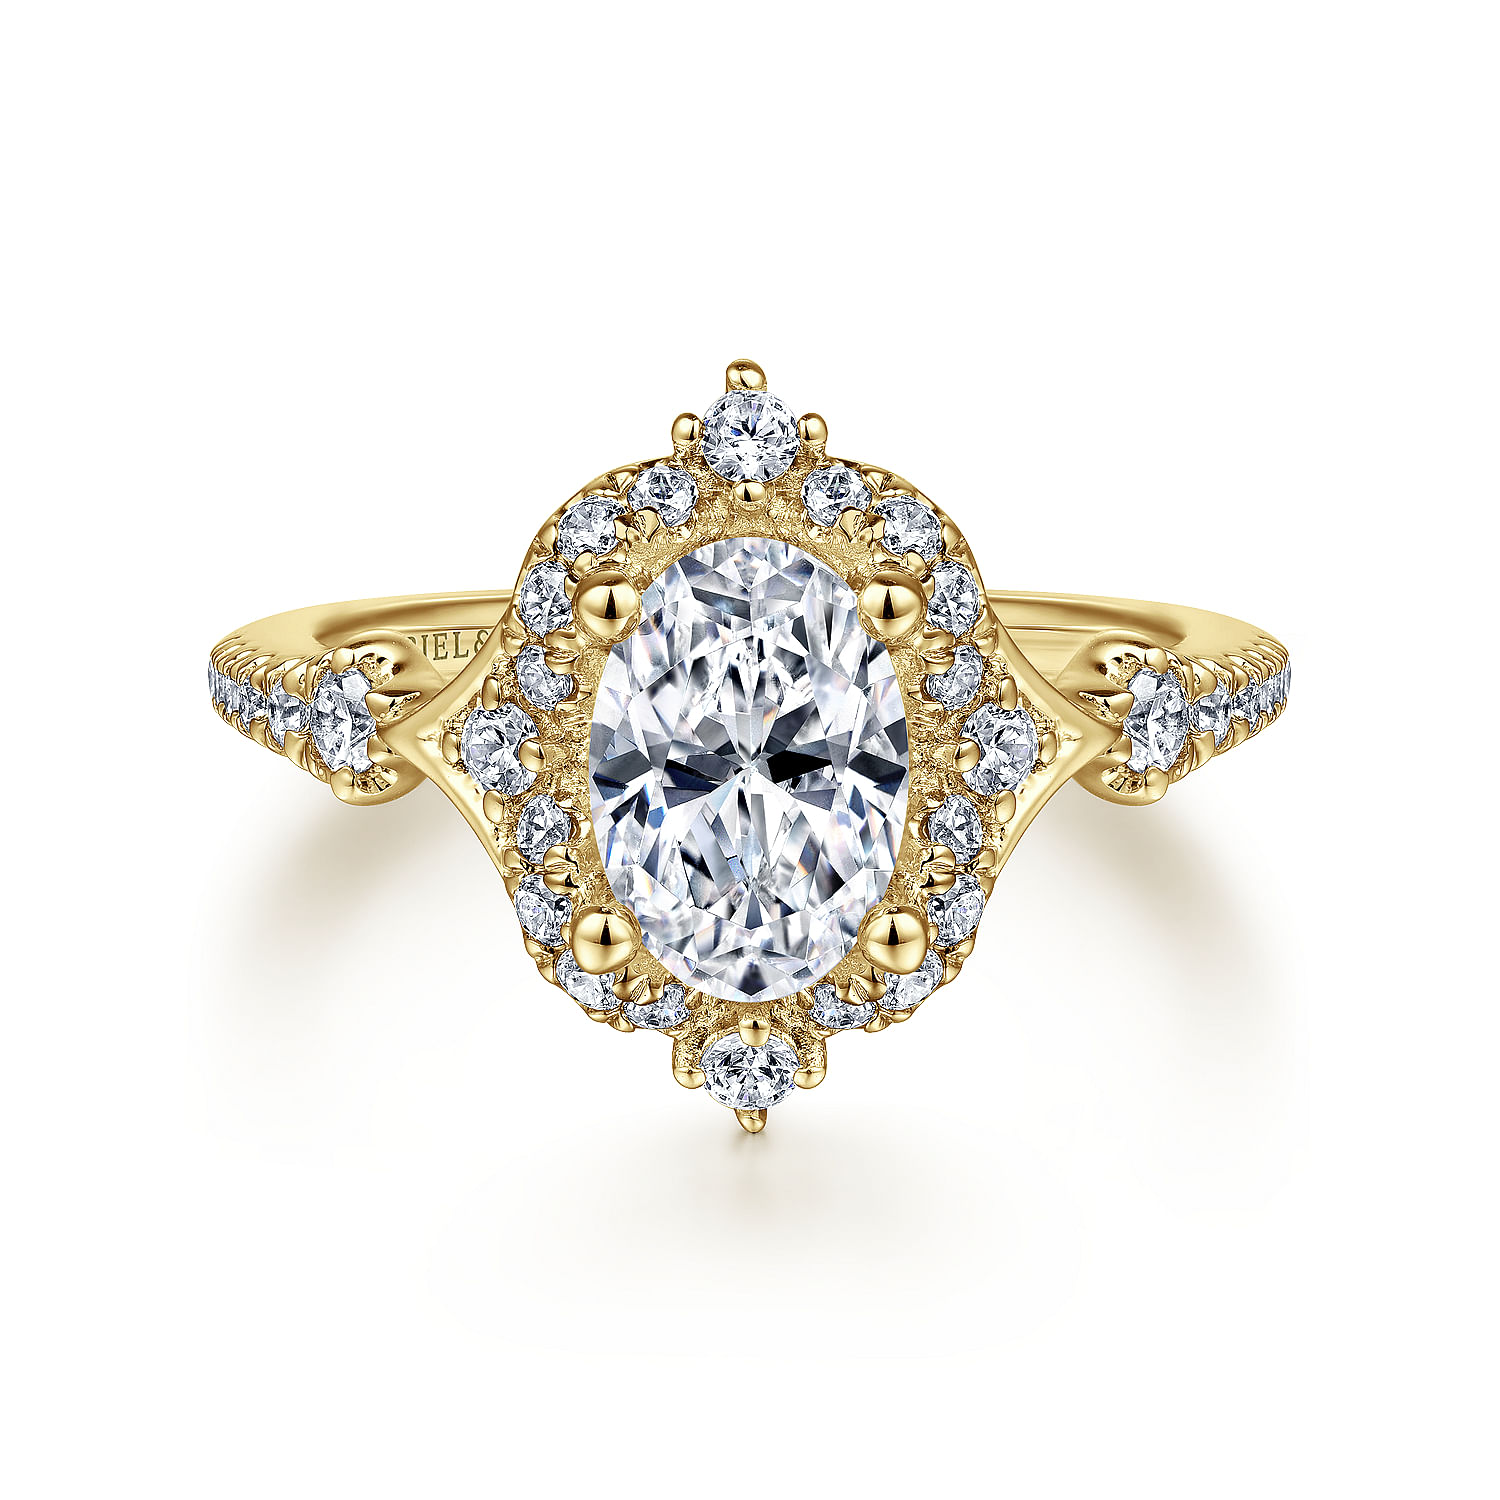 Veronique - Vintage Inspired 14K Yellow Gold Fancy Halo Oval Diamond Engagement Ring